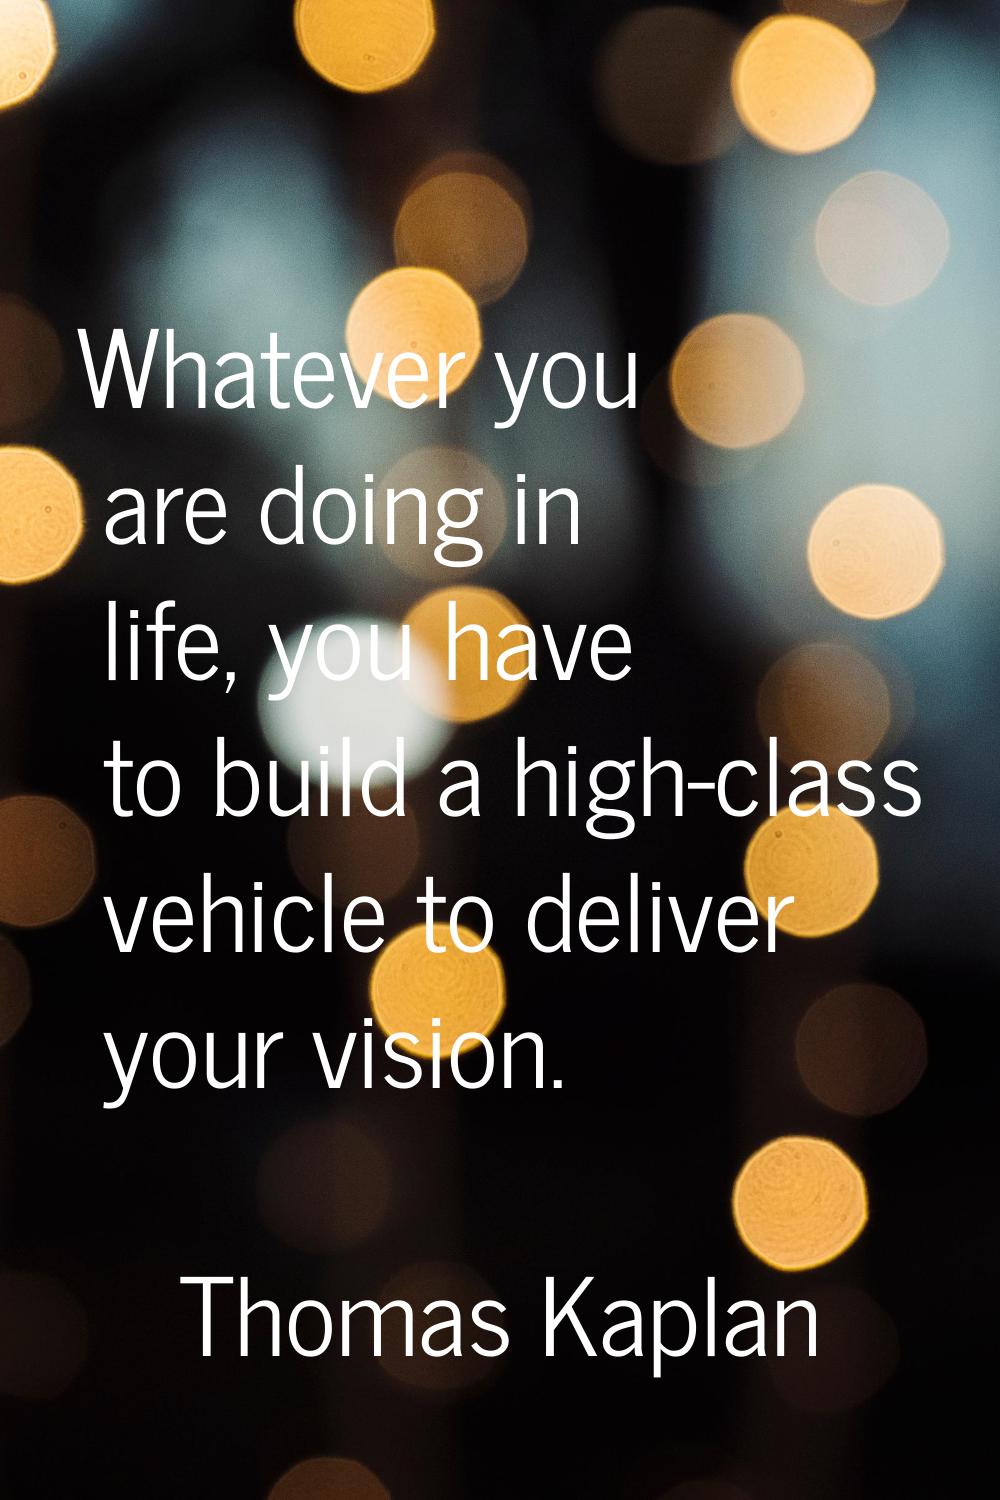 Whatever you are doing in life, you have to build a high-class vehicle to deliver your vision.